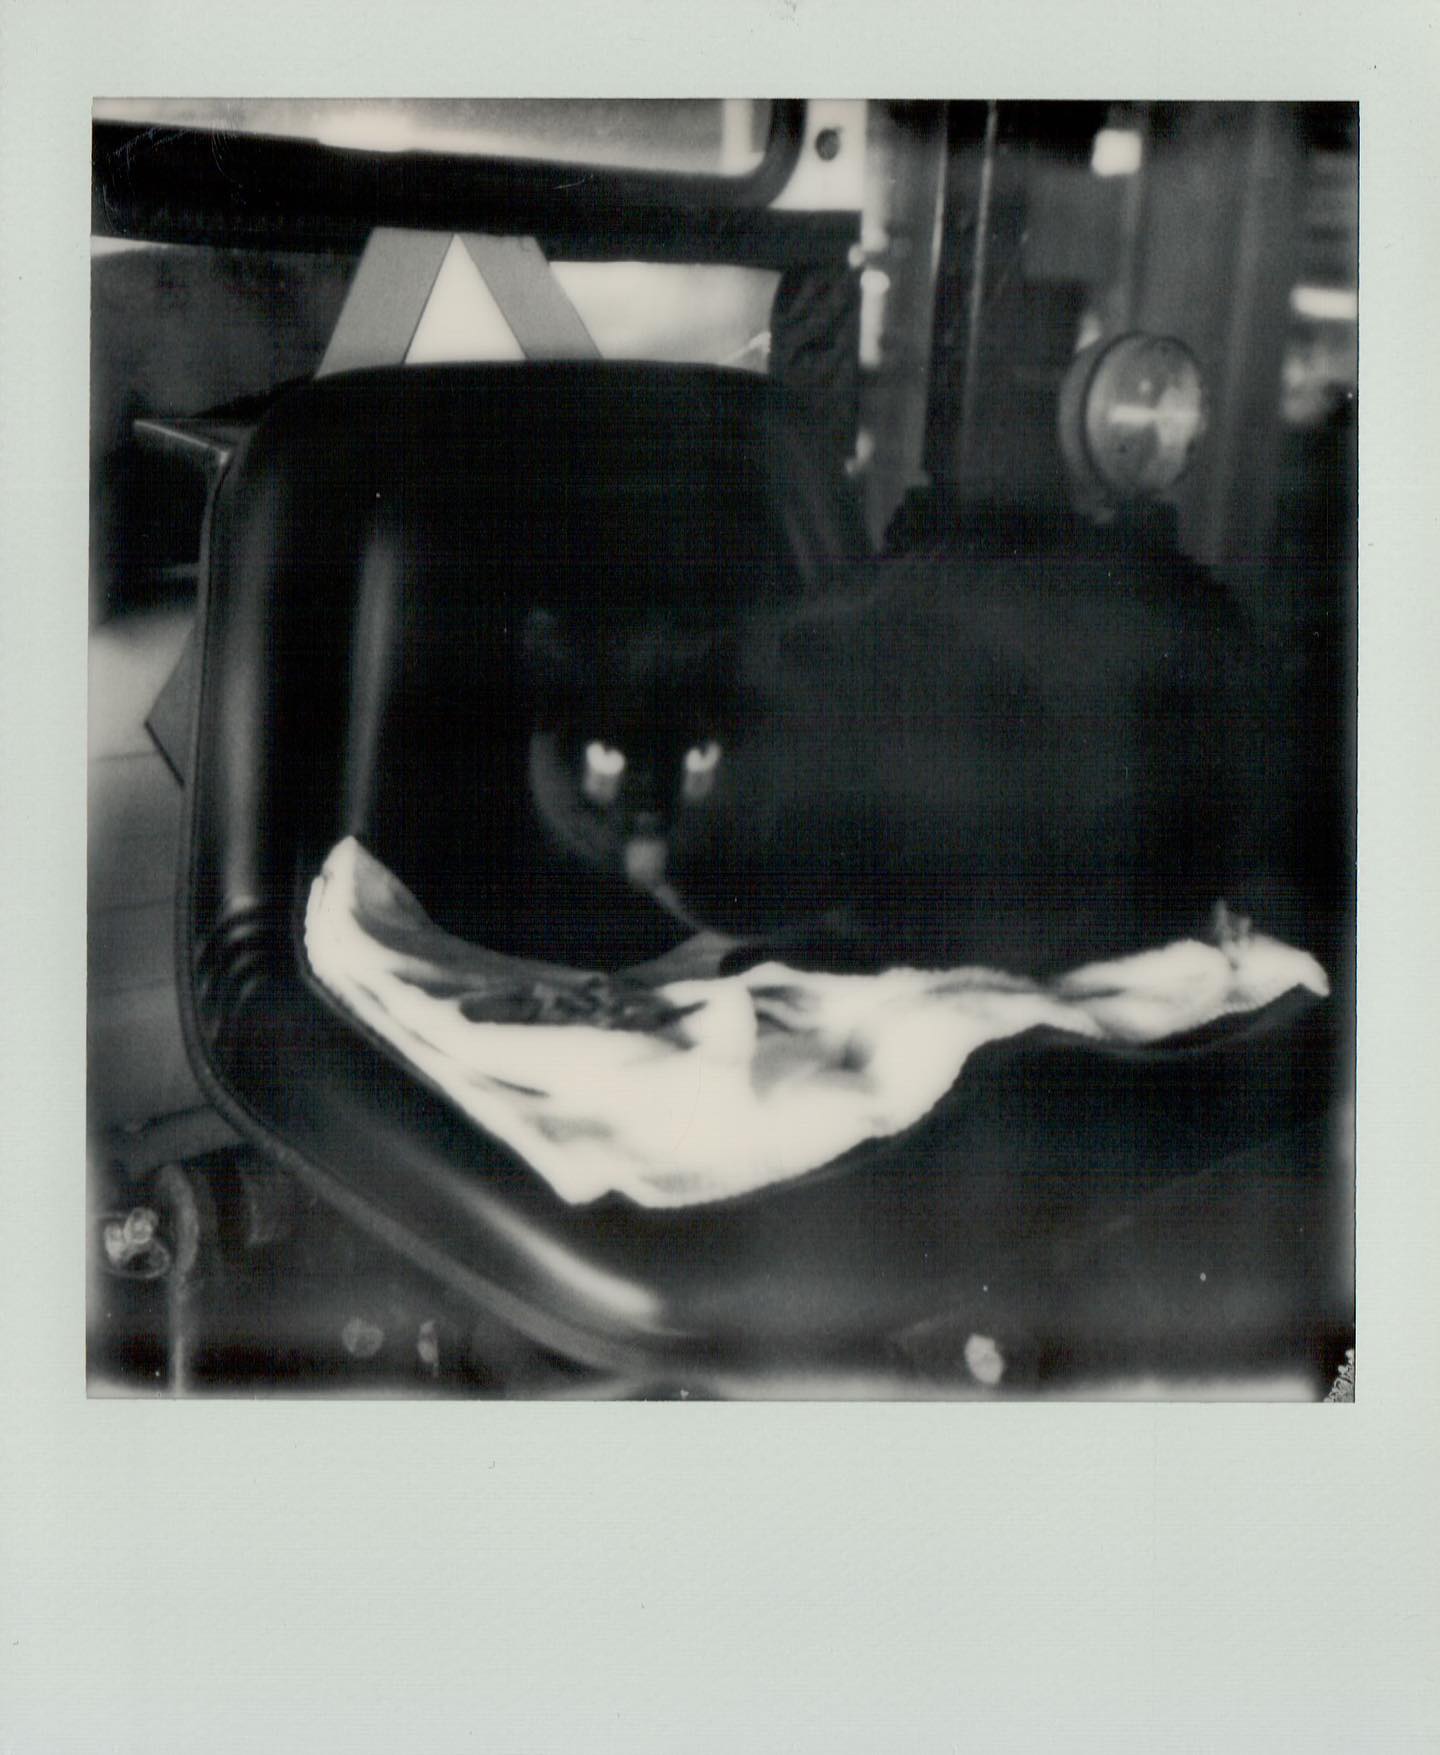 Blep 
My wife Laura is part of a team that takes care of a feral cat who lives in the parking garage at her work. With lockdown, the occasional short trips we make are a pleasant diversion, at least for us. Maybe not so much for Hope, who looks less than pleased to be captured eating treats on her construction equipment throne. #polaroidweek #polaroidweek2020 #roidweek #roidweek2020 #polaroid #film #filmphotography